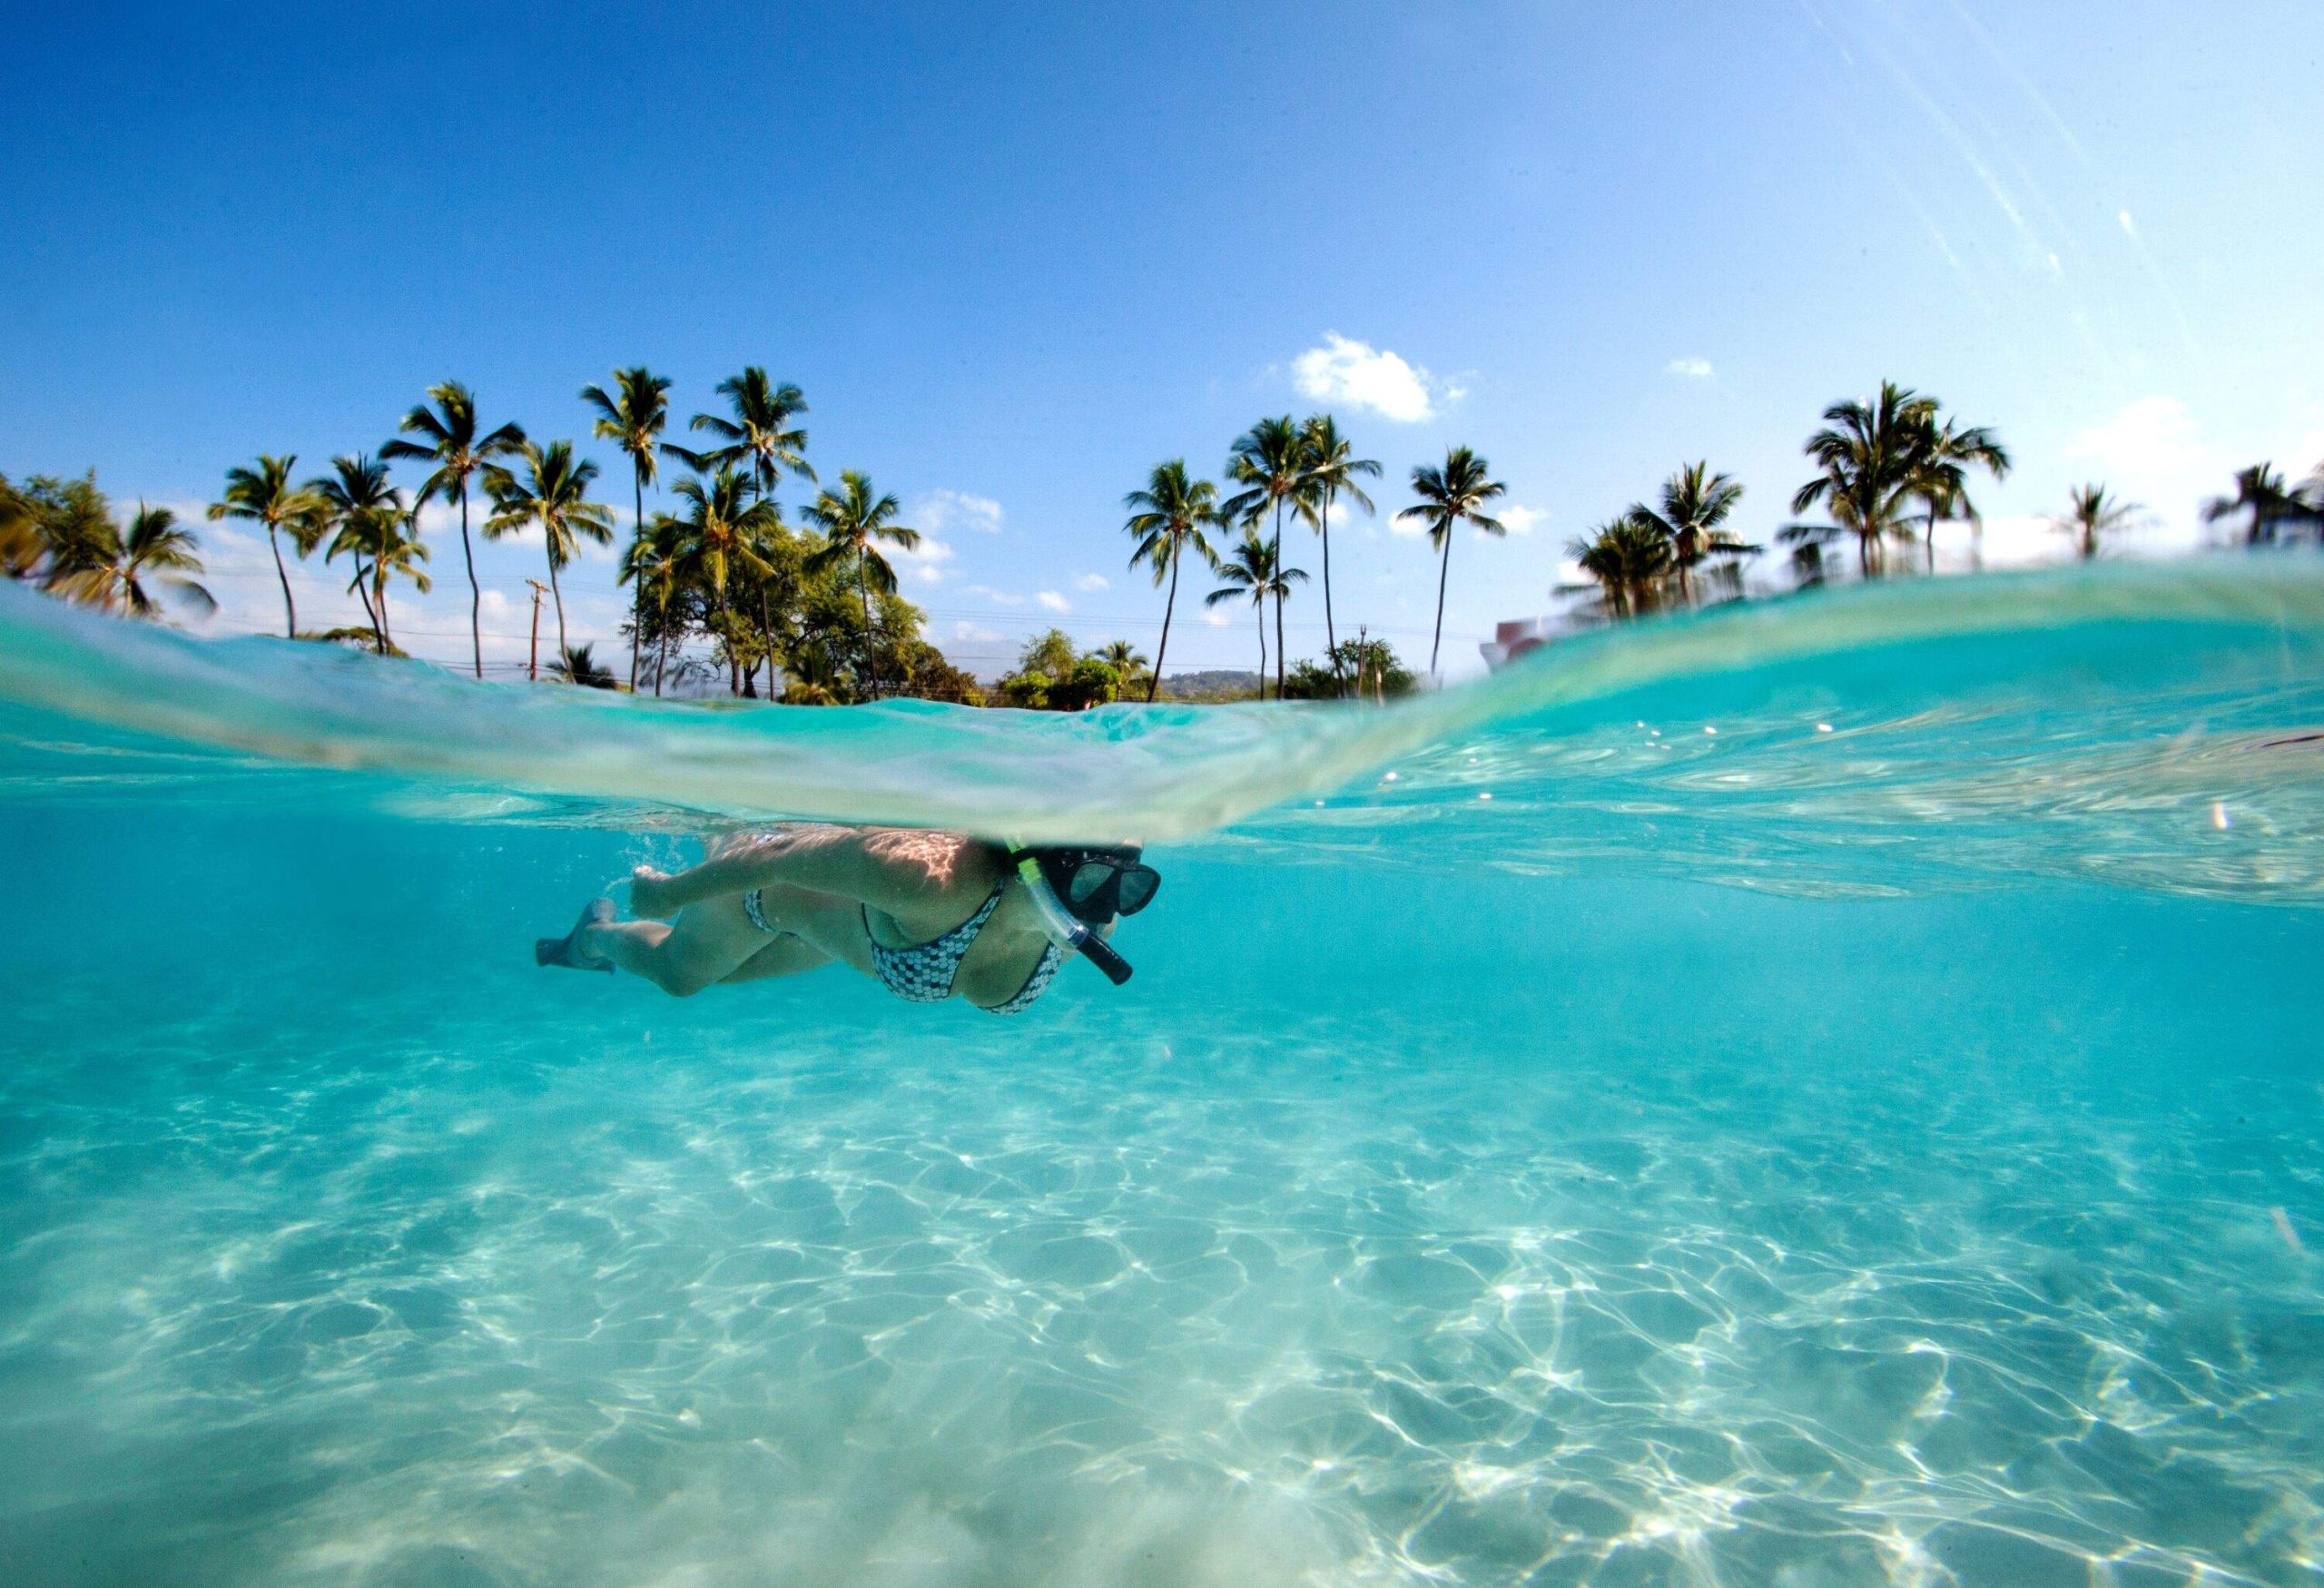 A female snorkels at the surface of the clear turquoise water surrounded by palm trees against the blue sky.